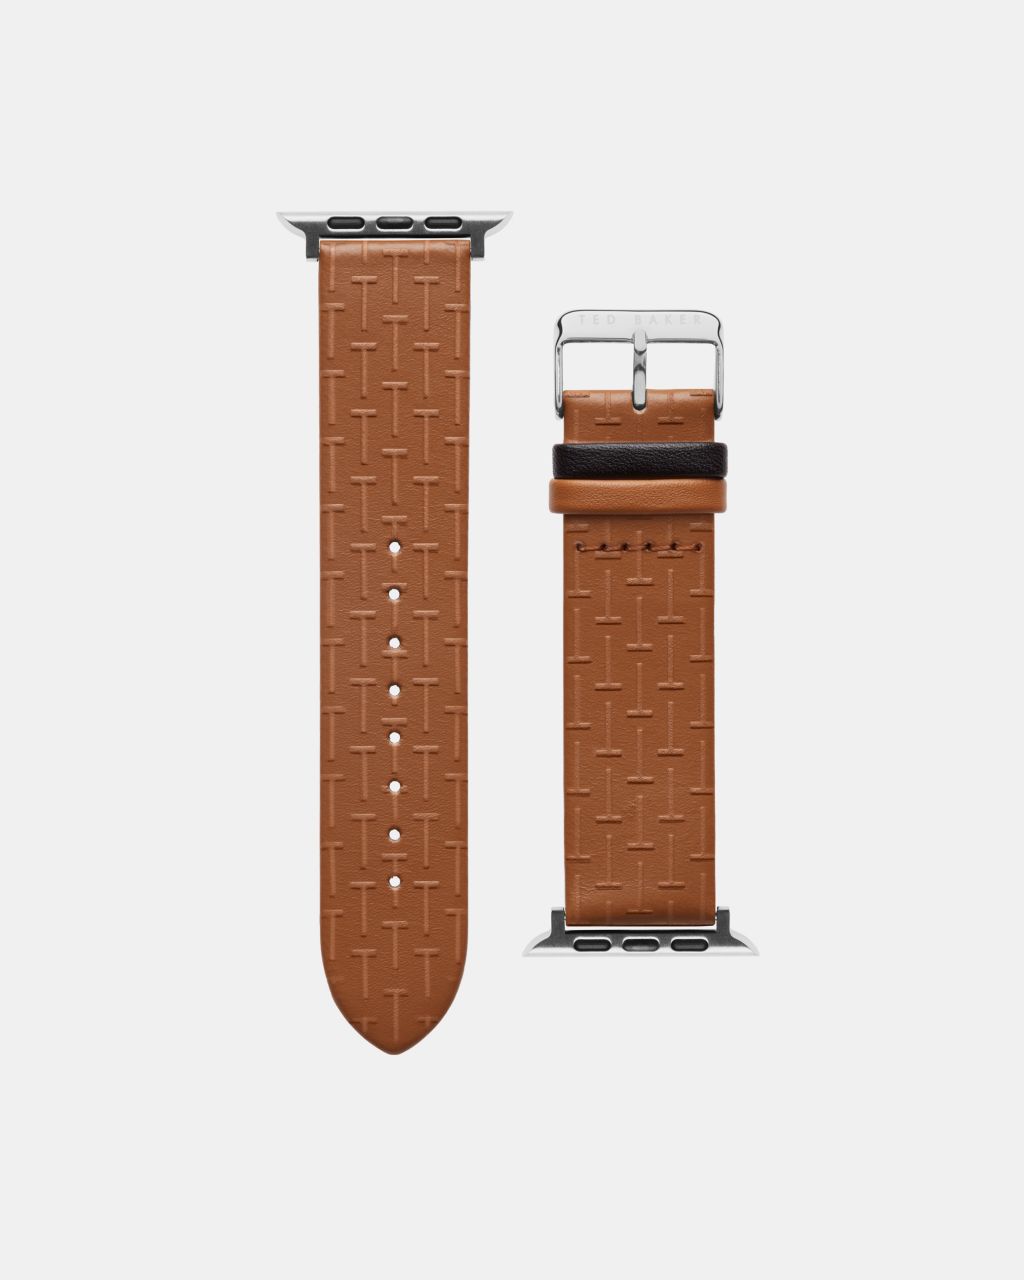 Ted Baker Embossed Leather Apple Watch Strap in Tan CARBOM, Men's Accessories